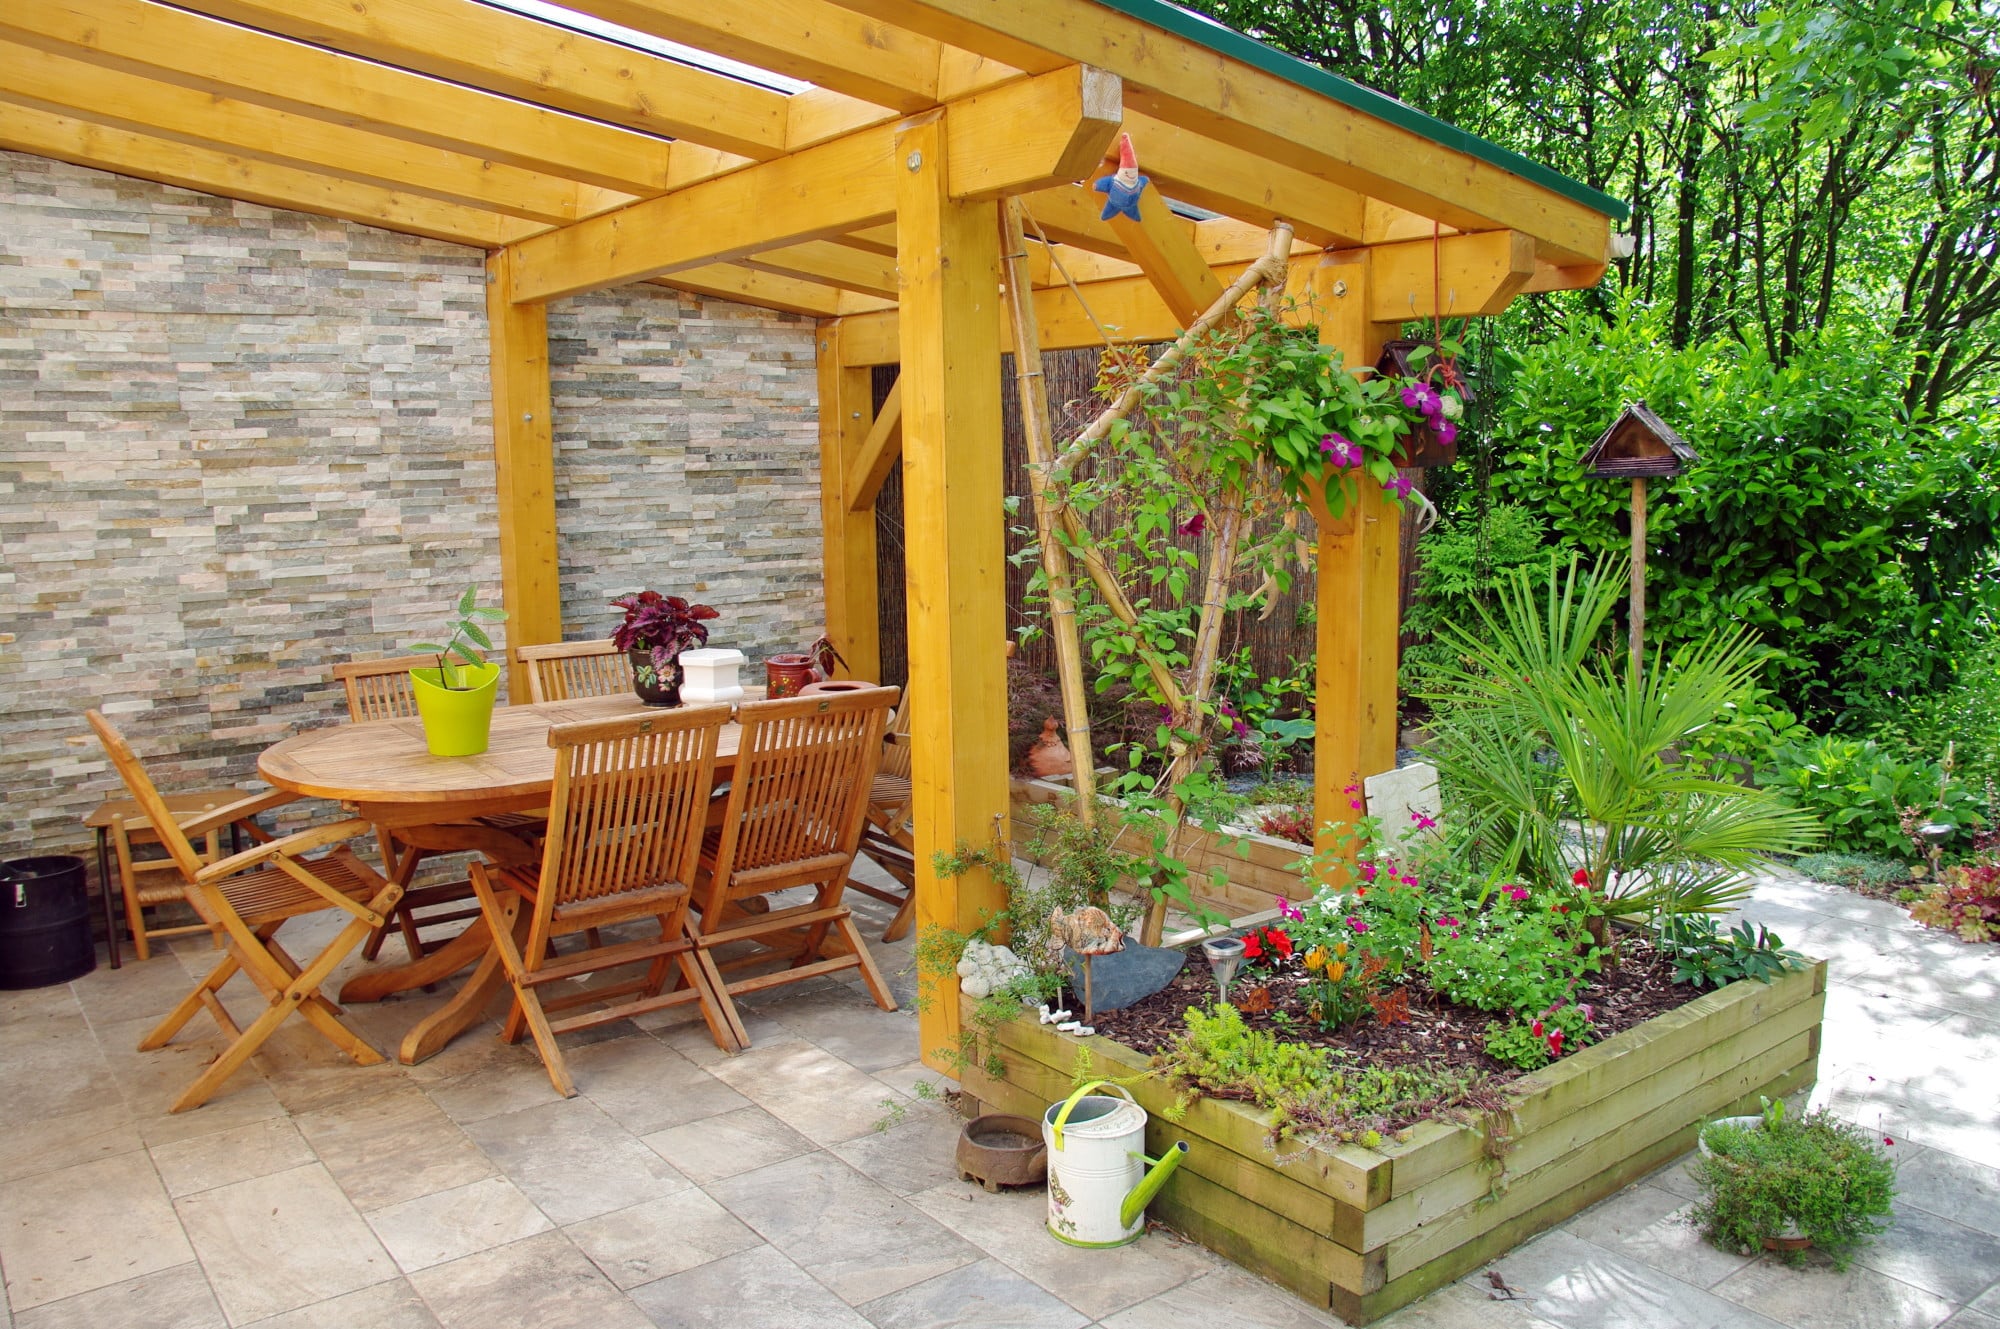 4 Tips for Creating a Family Friendly Outdoor Living Space